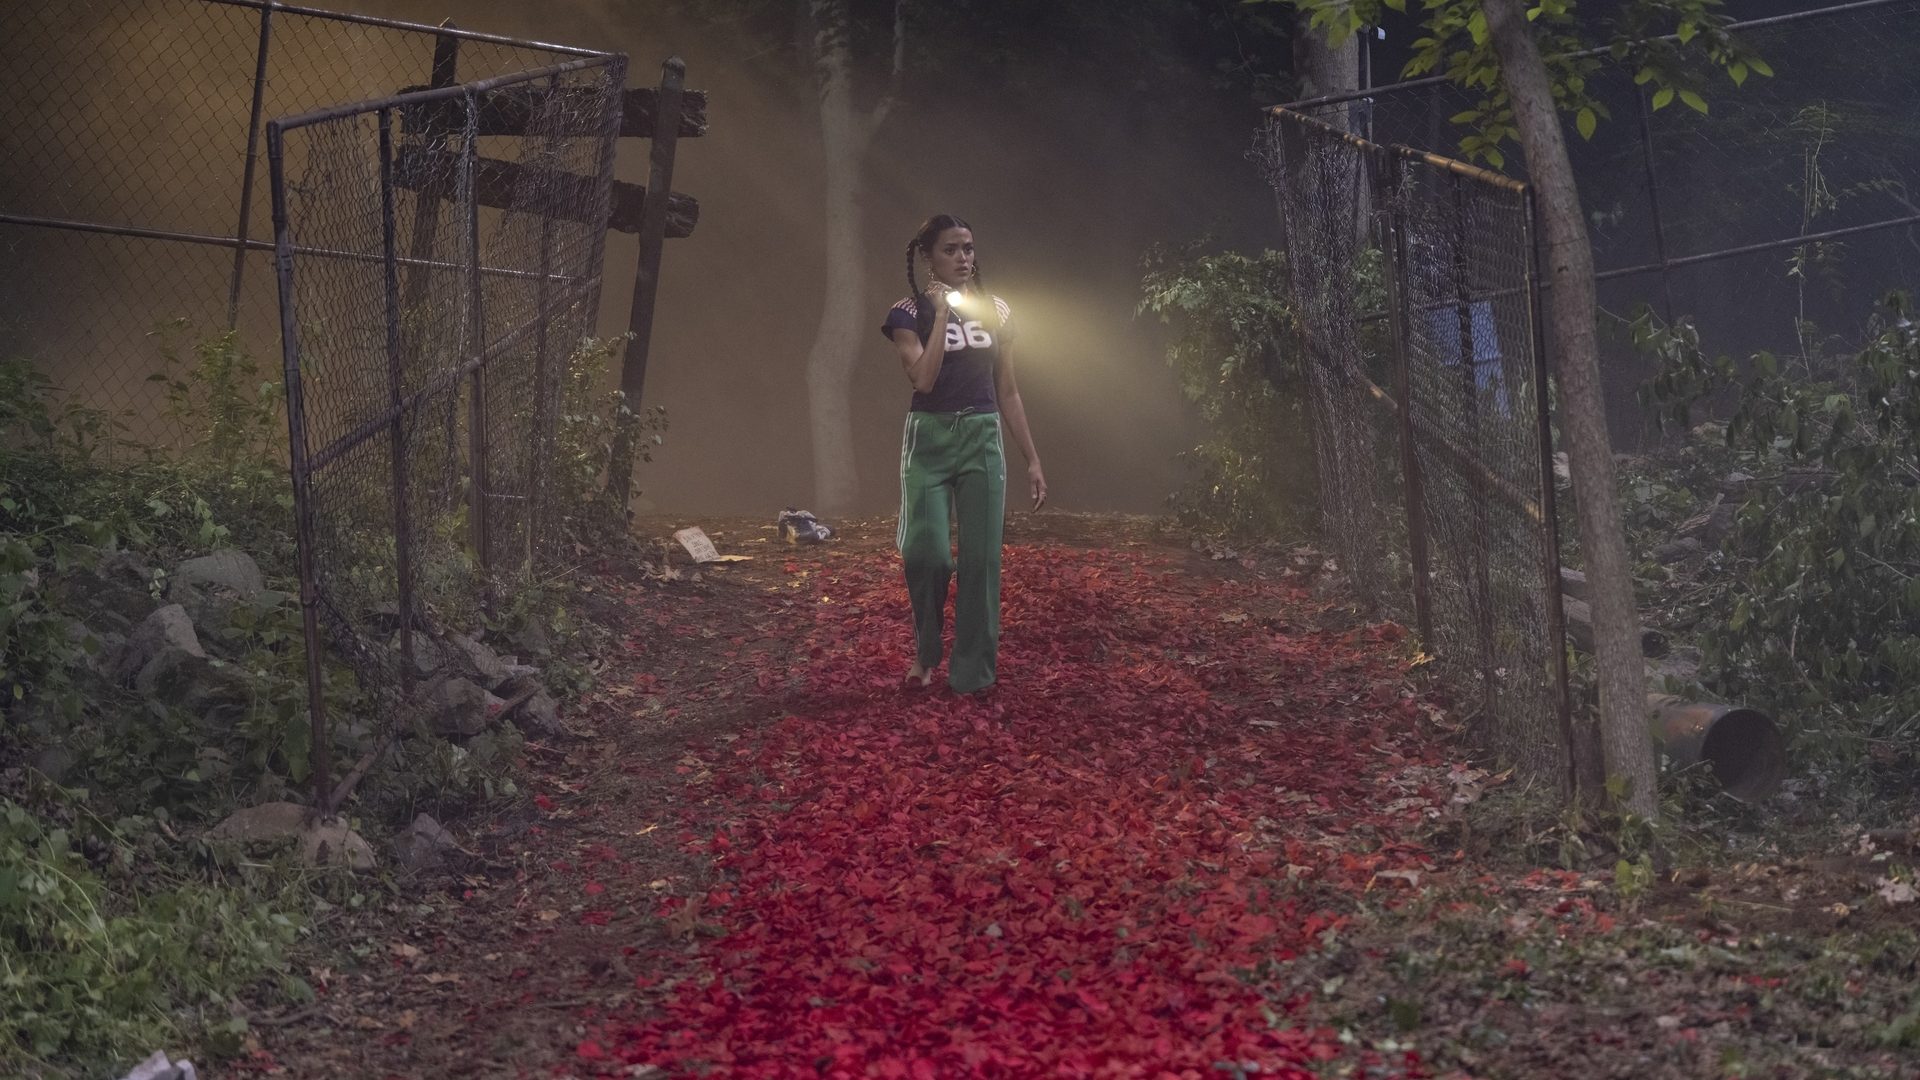 A teenage girl with pigtails holds a flashlight as she walks down a path in a wooded area. The path is lined with red rose petals. 